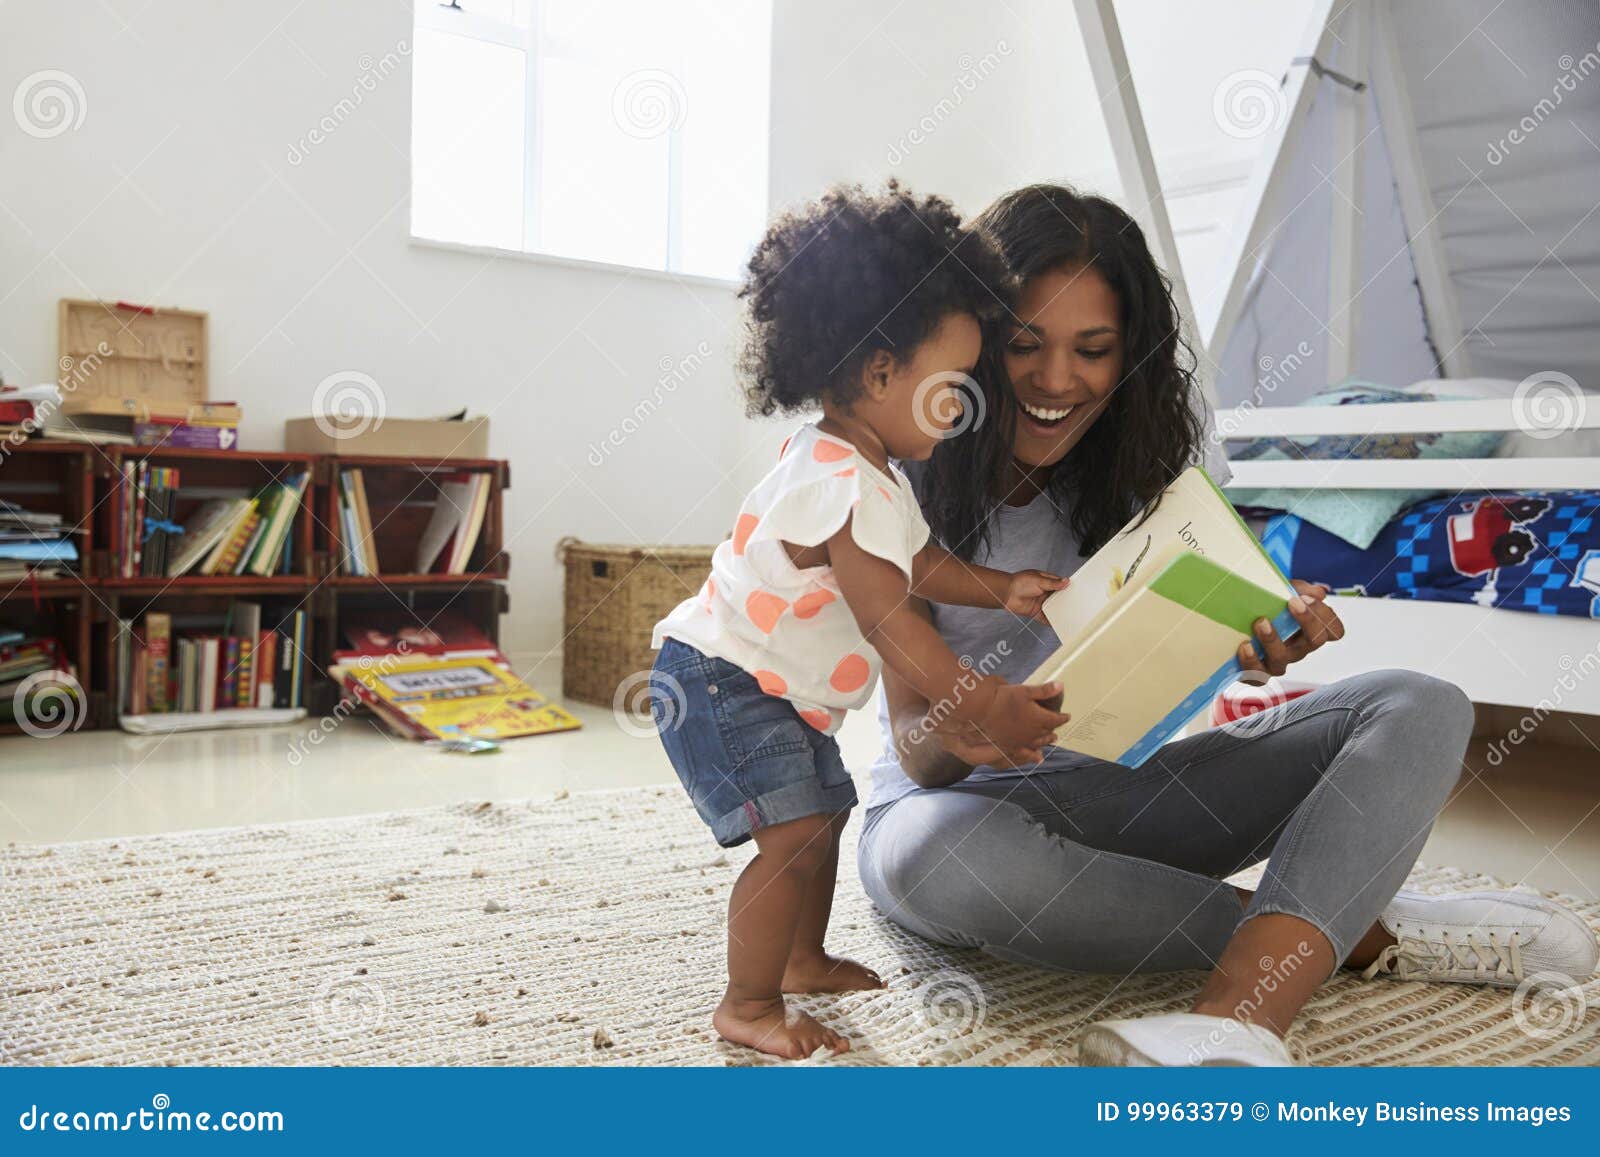 mother and baby daughter reading book in playroom together